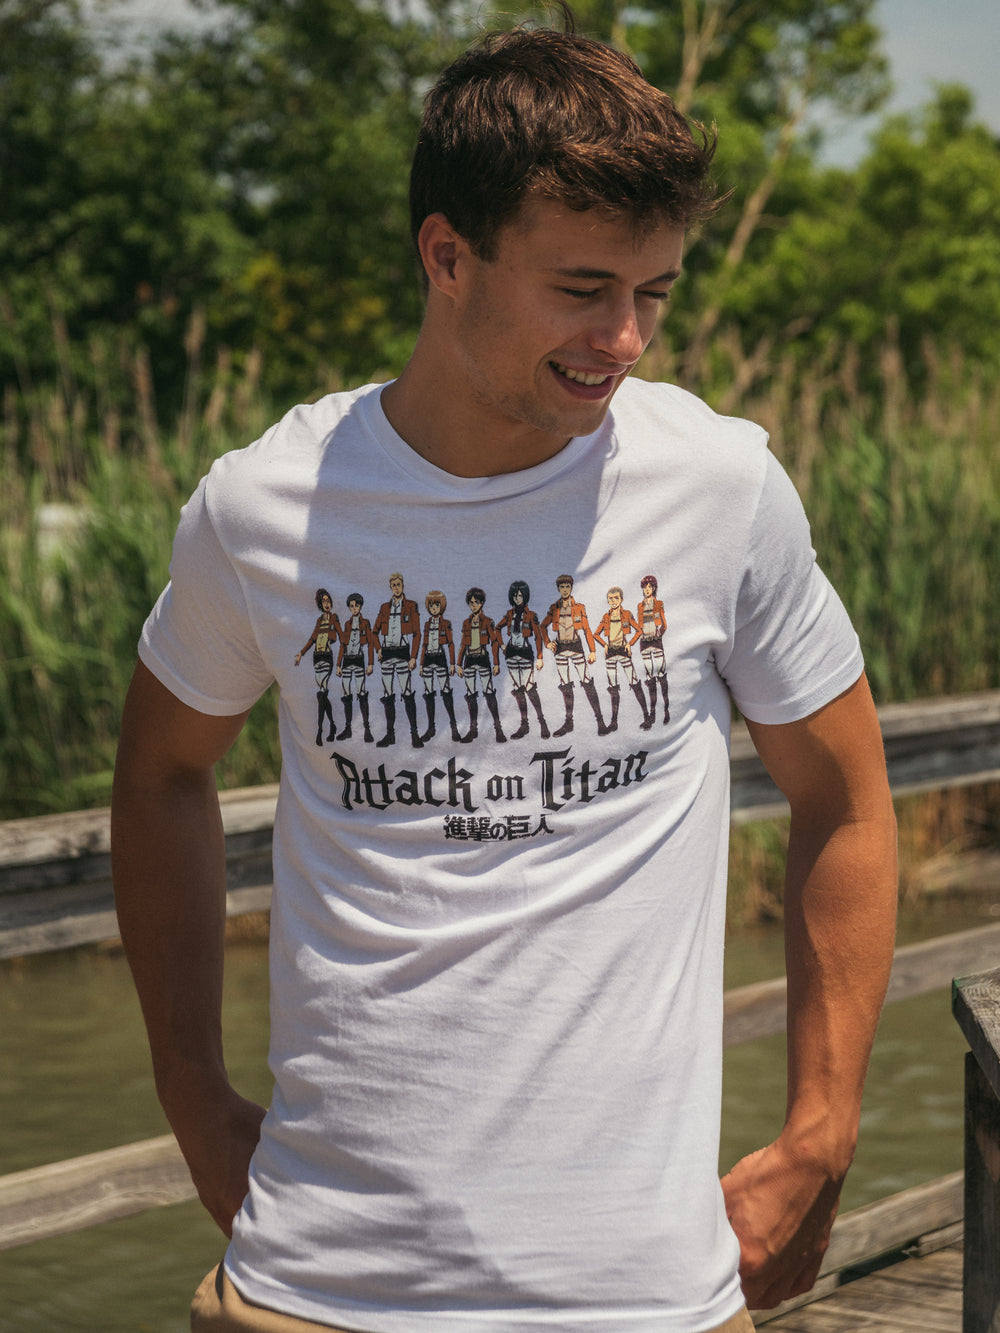 NTD APPAREL ATTACK ON TITAN GROUP T-SHIRT - CLEARANCE